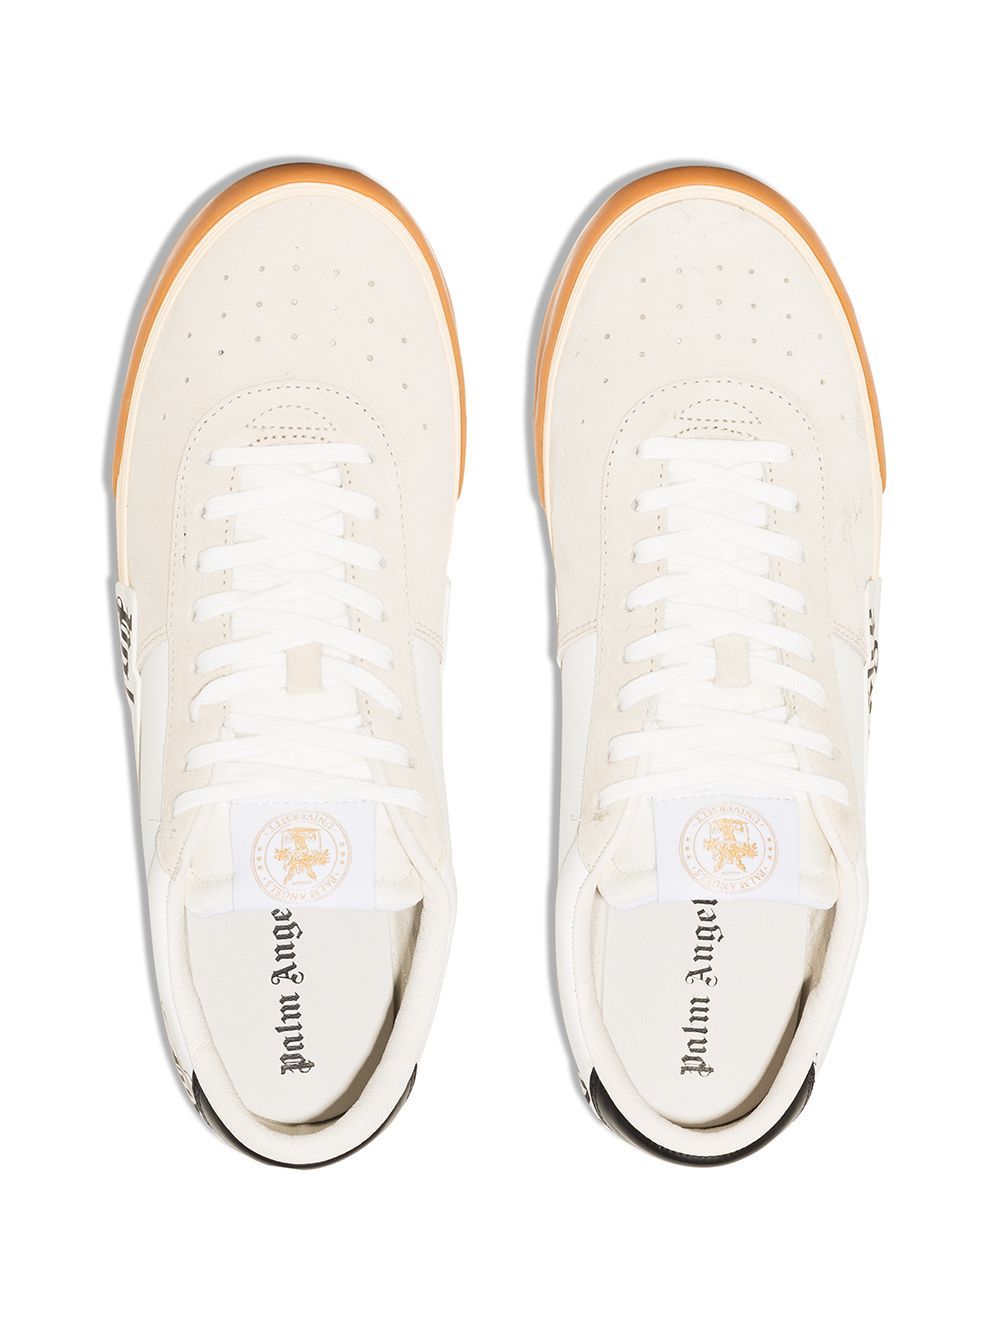 0110 PALM ANGELS VULCANIZED LOW-TOP SNEAKERS